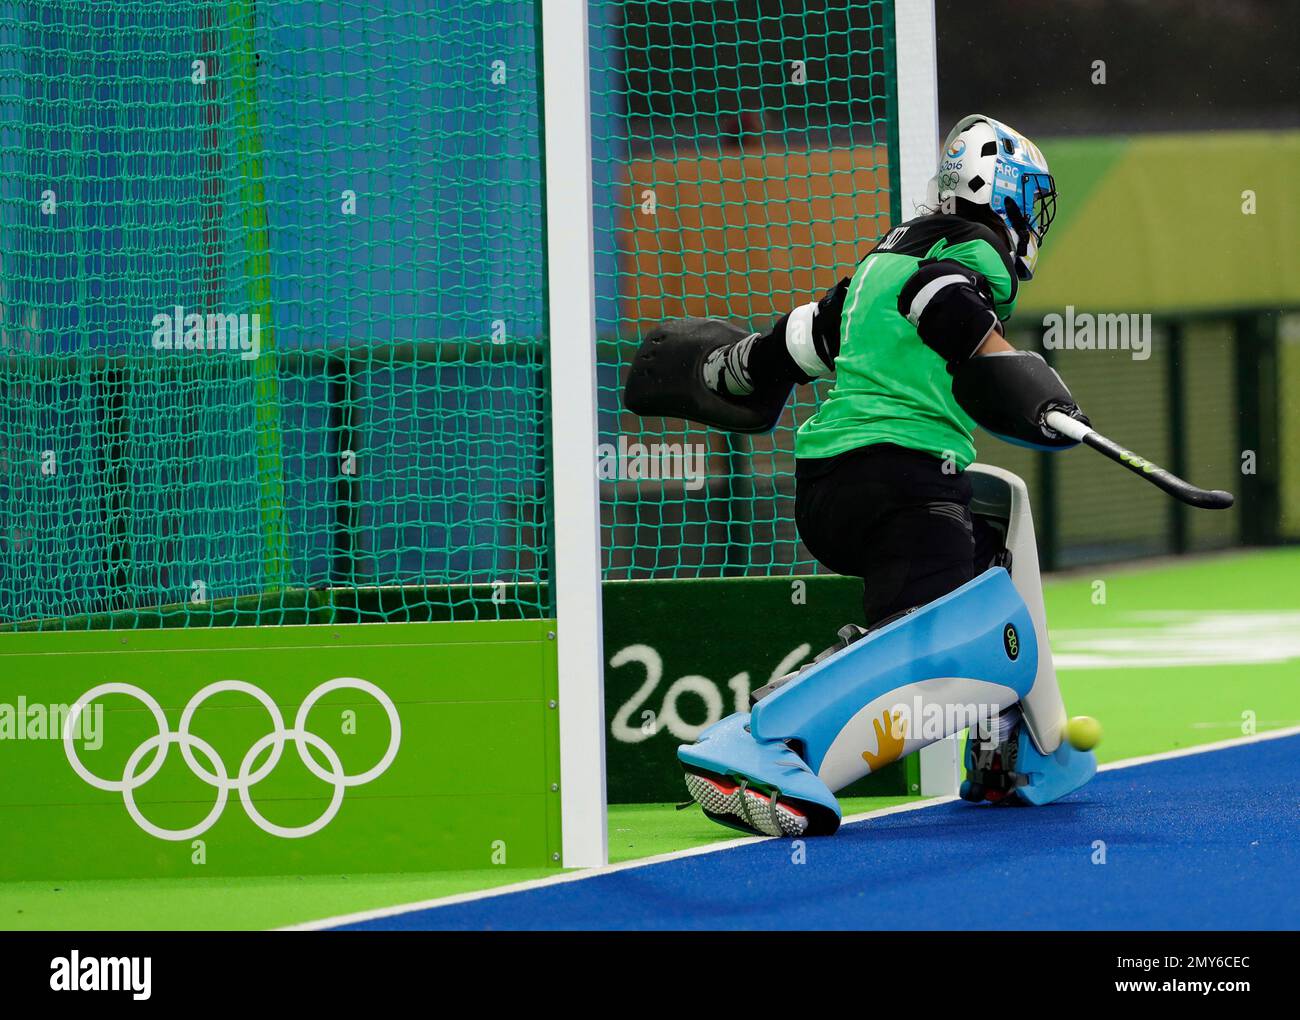 Argentina's goalkeeper Belem Succi, saves a penalty shot against Britain  during a women's field hockey match at 2016 Summer Olympics in Rio de  Janeiro, Brazil, Wednesday, Aug. 10, 2016. (AP Photo/Hussein Malla